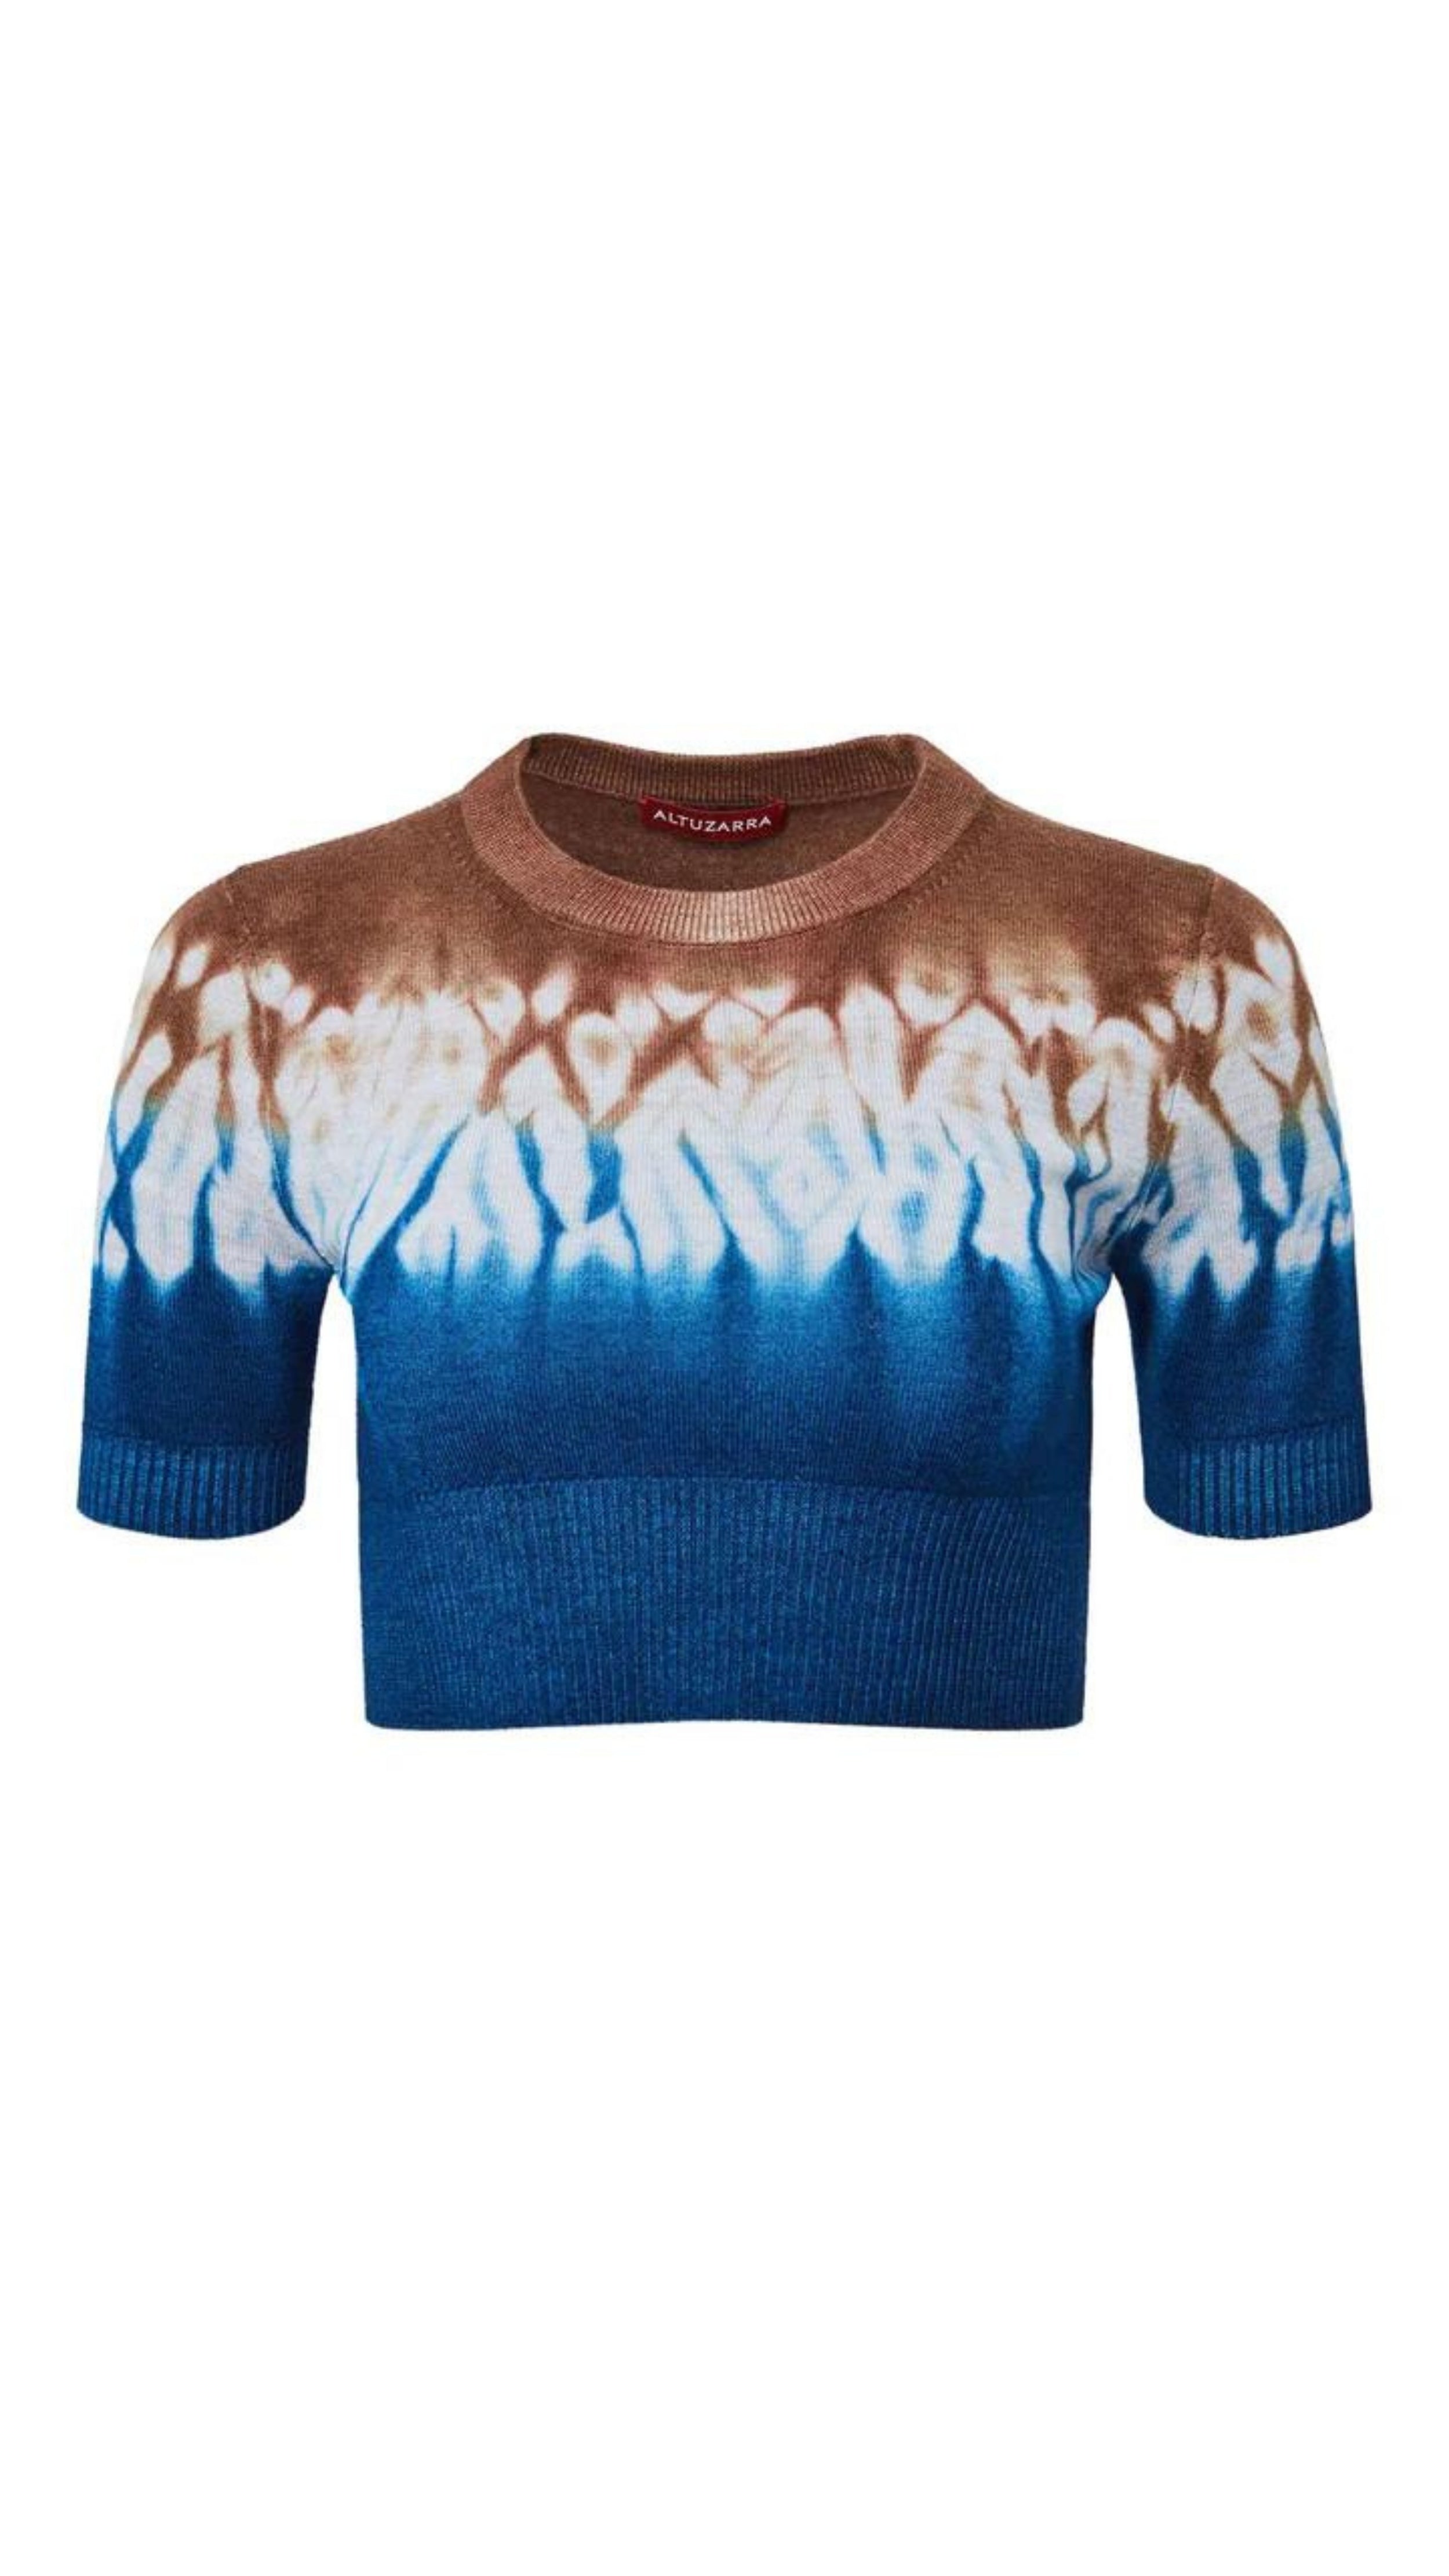 Altuzarra Nicholas Sweater. Made in Italy from soft superfine merino wool. This cropped style sweater features a unique blend of ultramarine blue and brown hues, created using Altuzarra's Shibori dyeing technique. This summer knit top features cap sleeves and a crew neckline. Shown flat from the front.